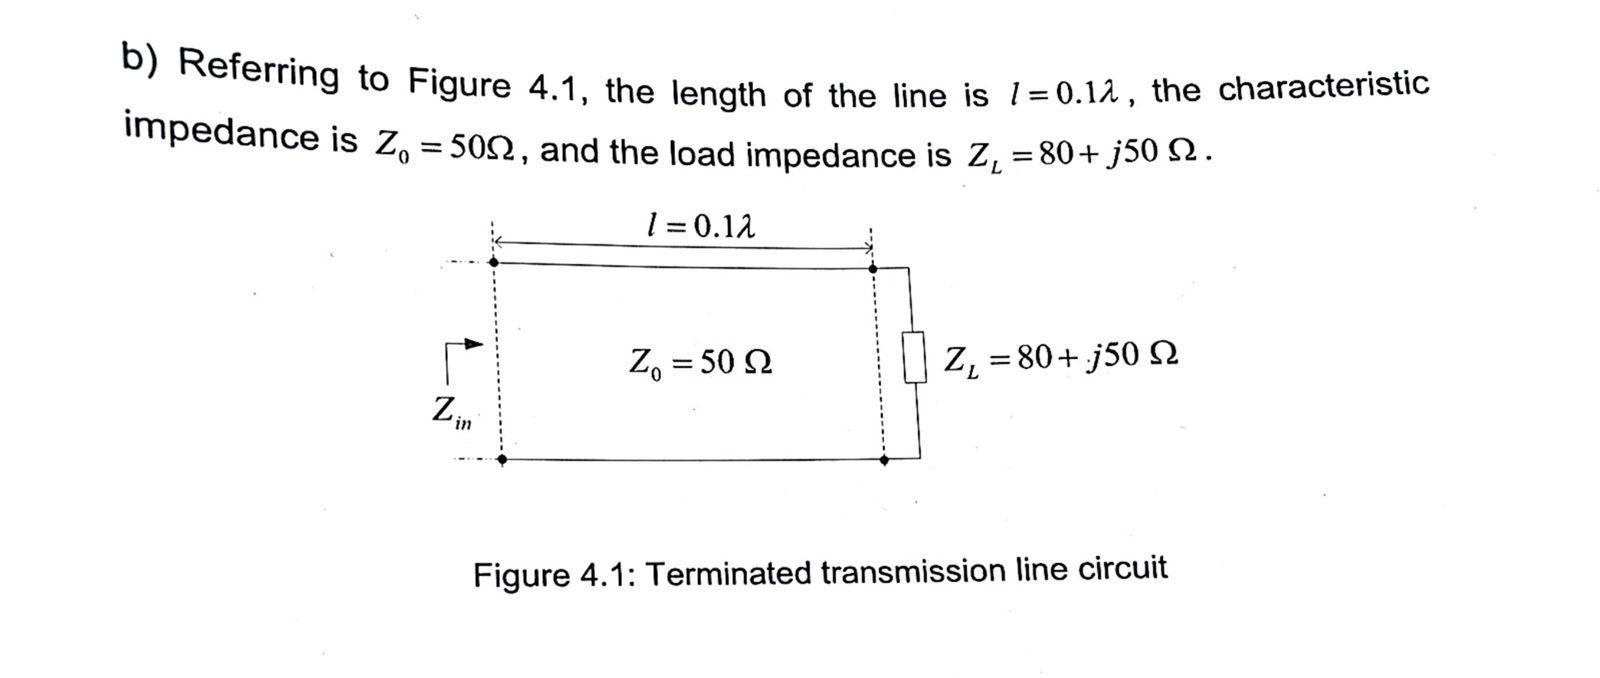 b) Referring to Figure 4.1, the length of the line is /=0.12, the characteristic impedance is Z = 509, and